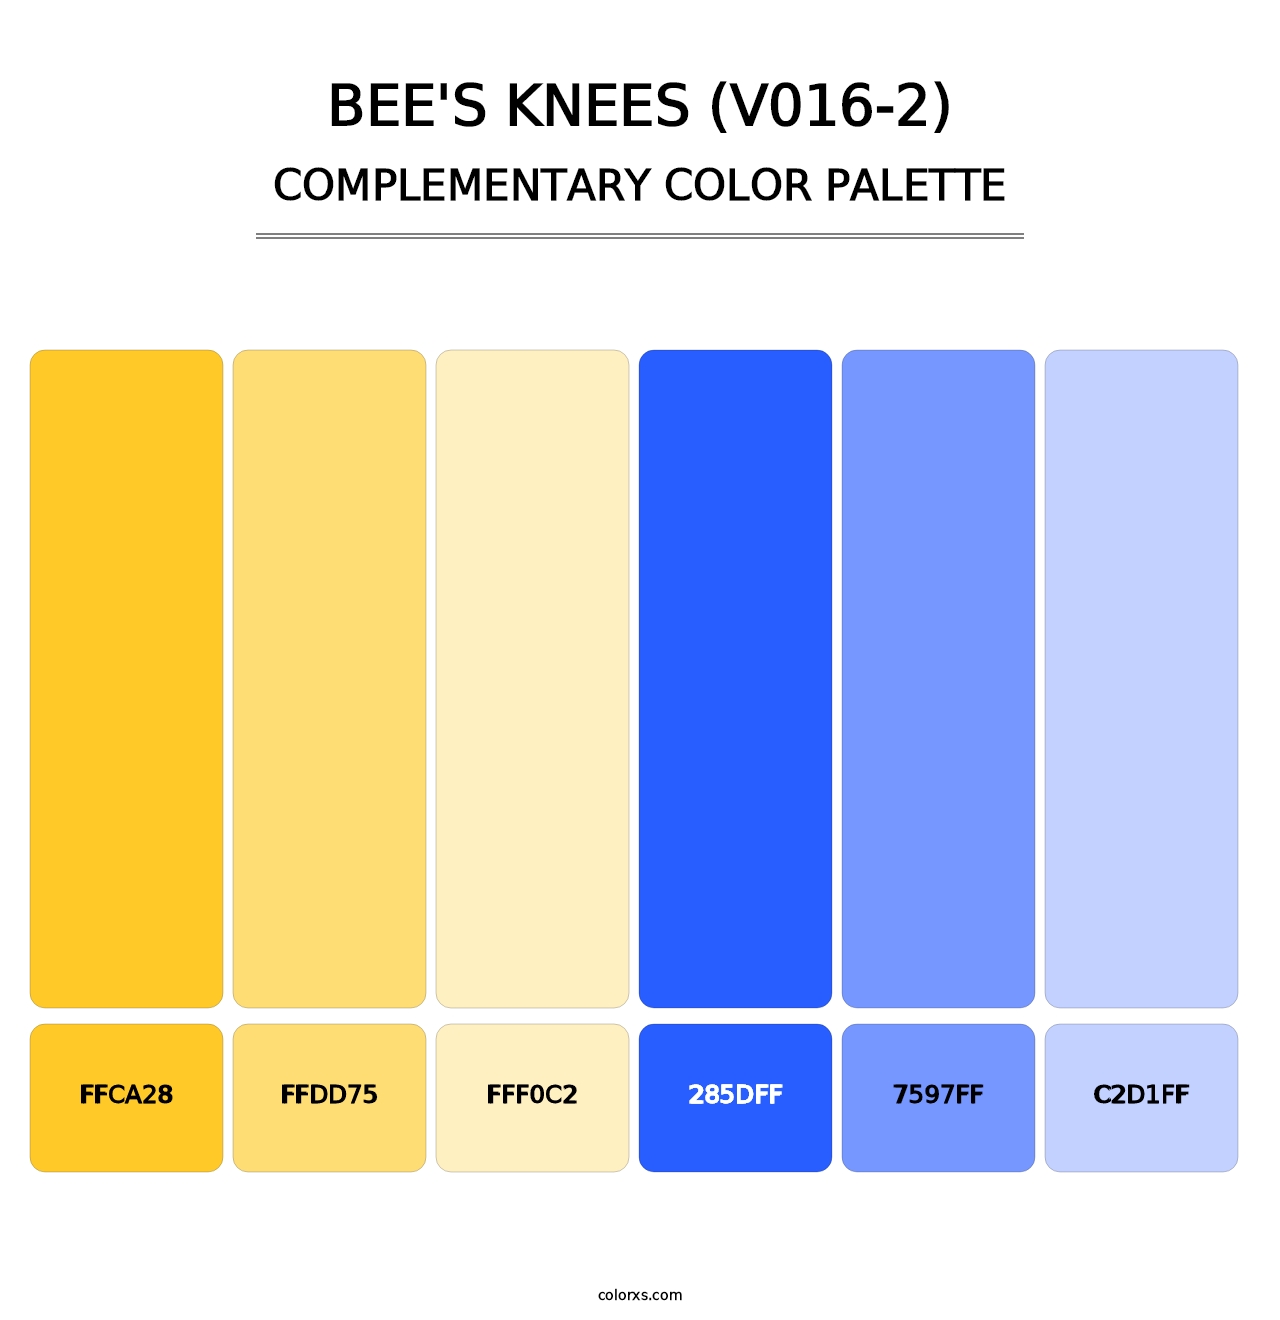 Bee's Knees (V016-2) - Complementary Color Palette